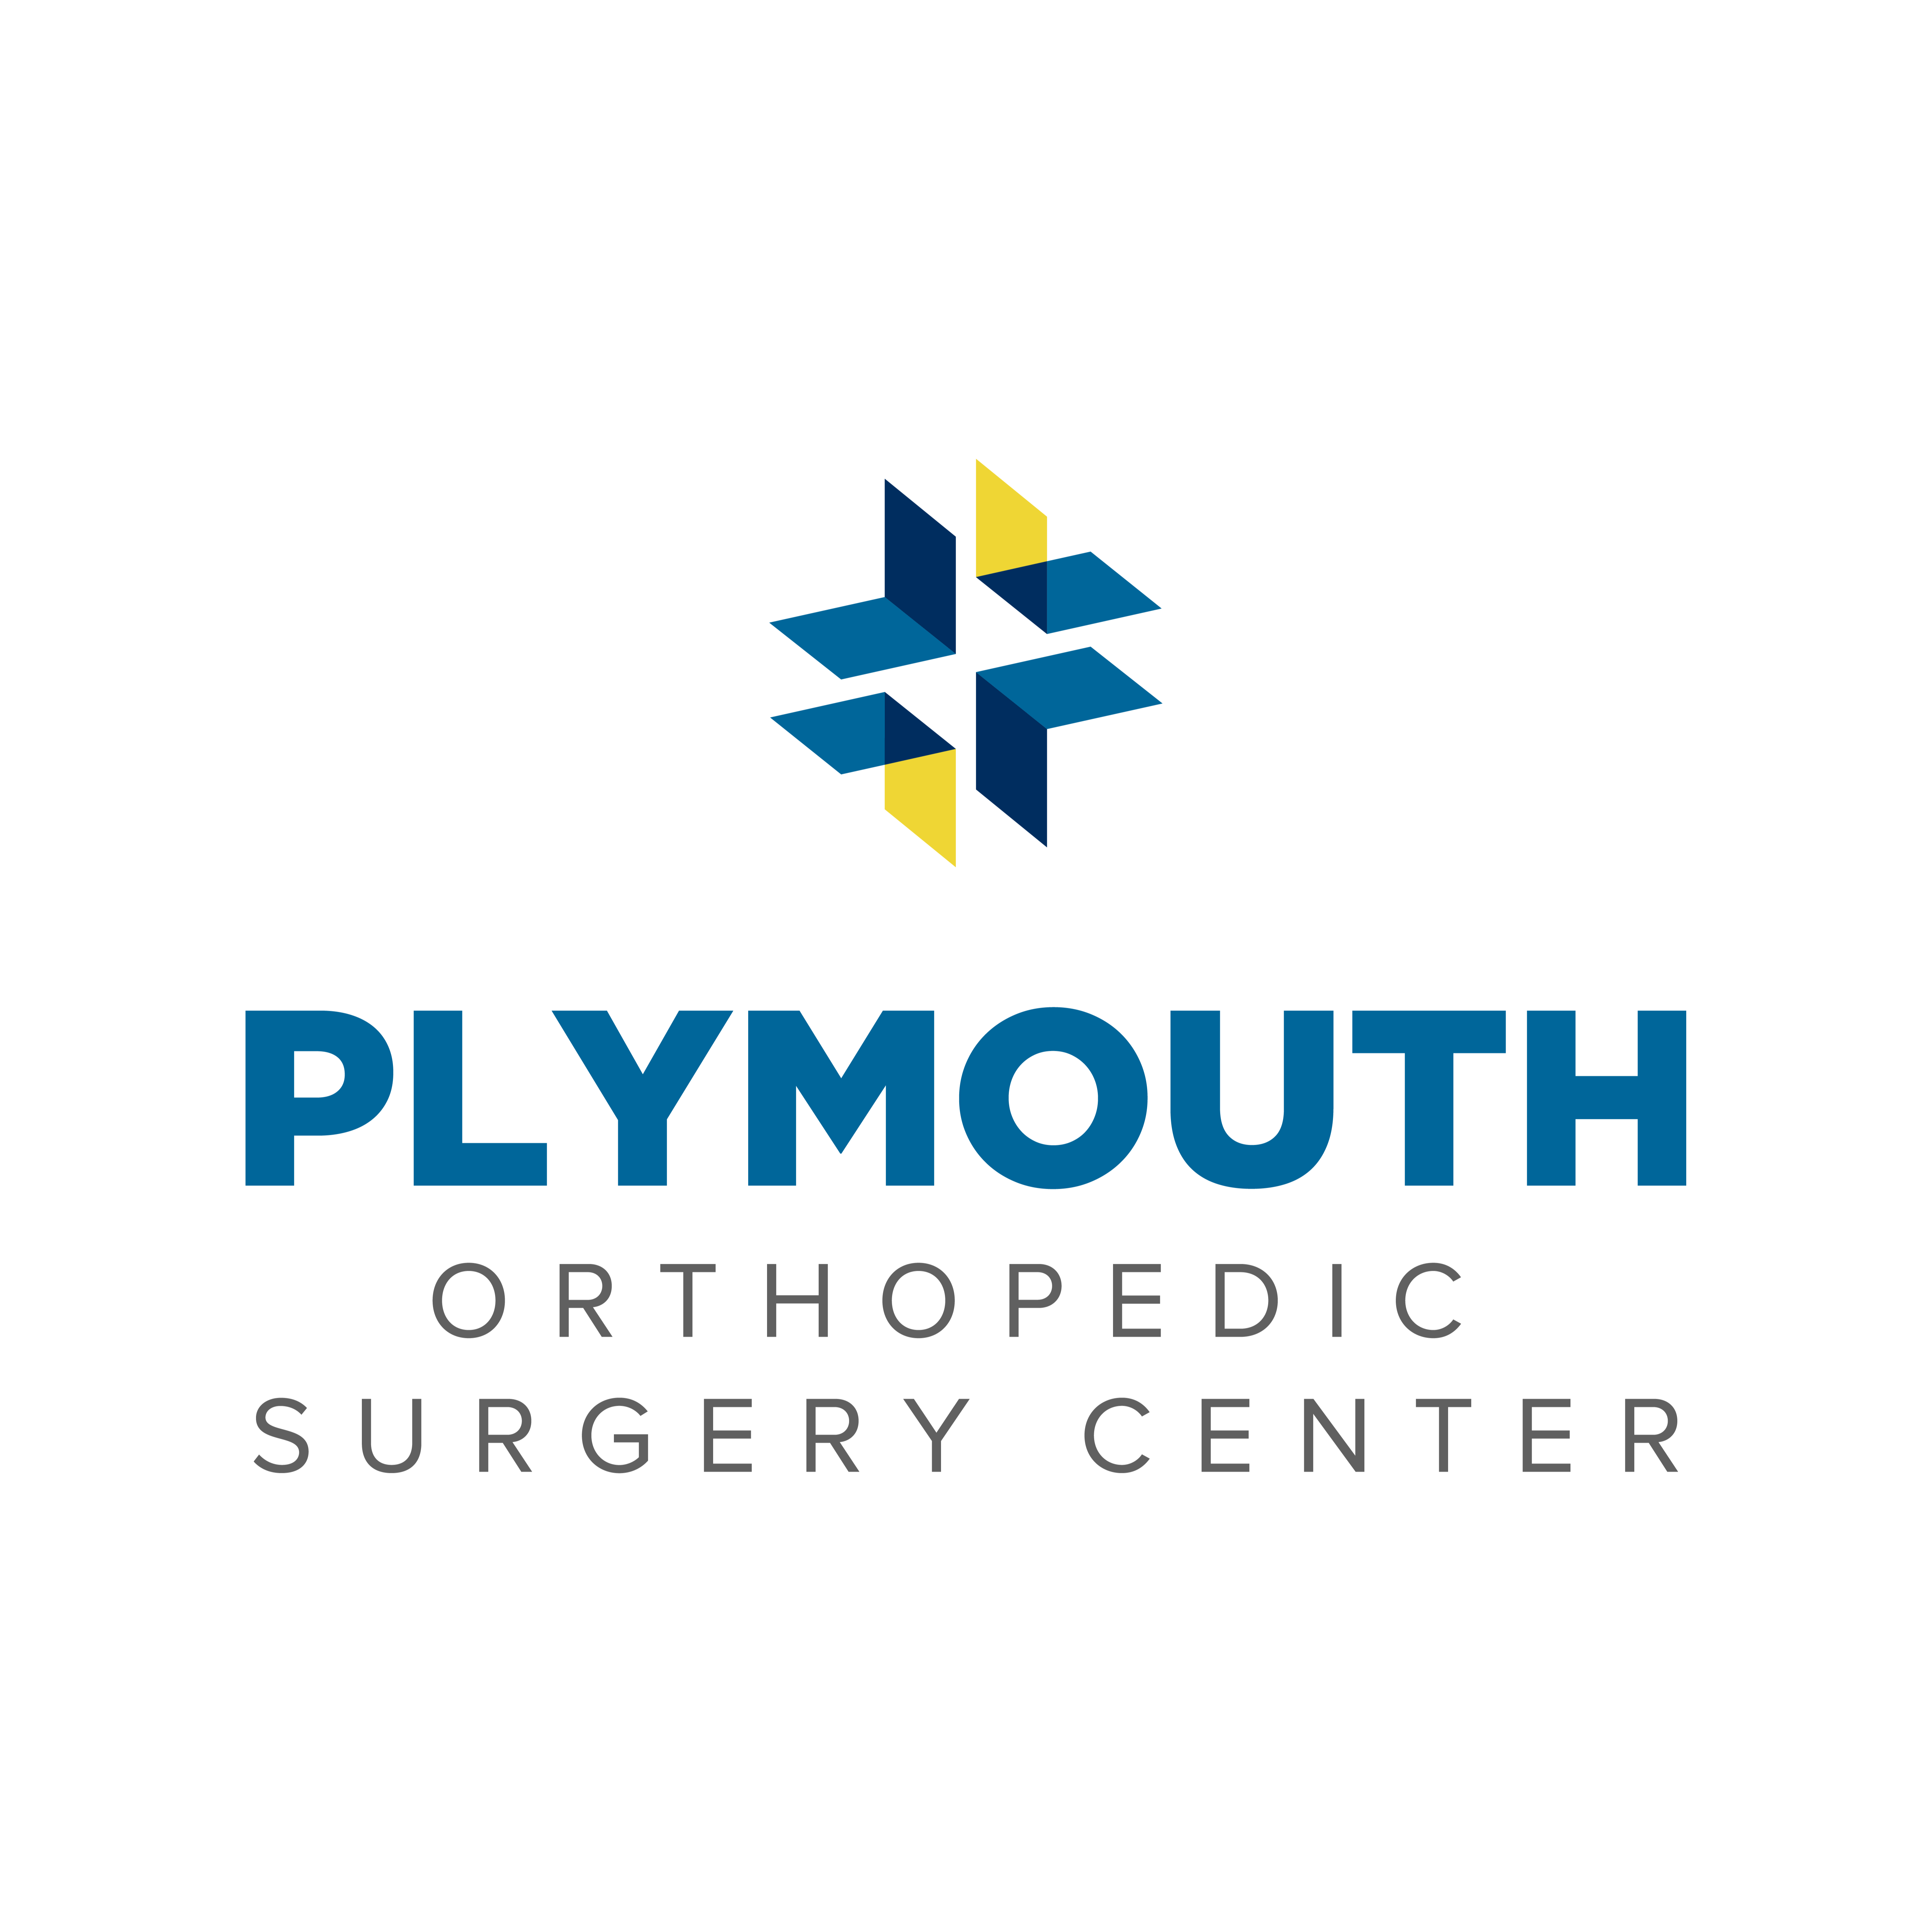 Plymouth Orthopedic Surgery Center